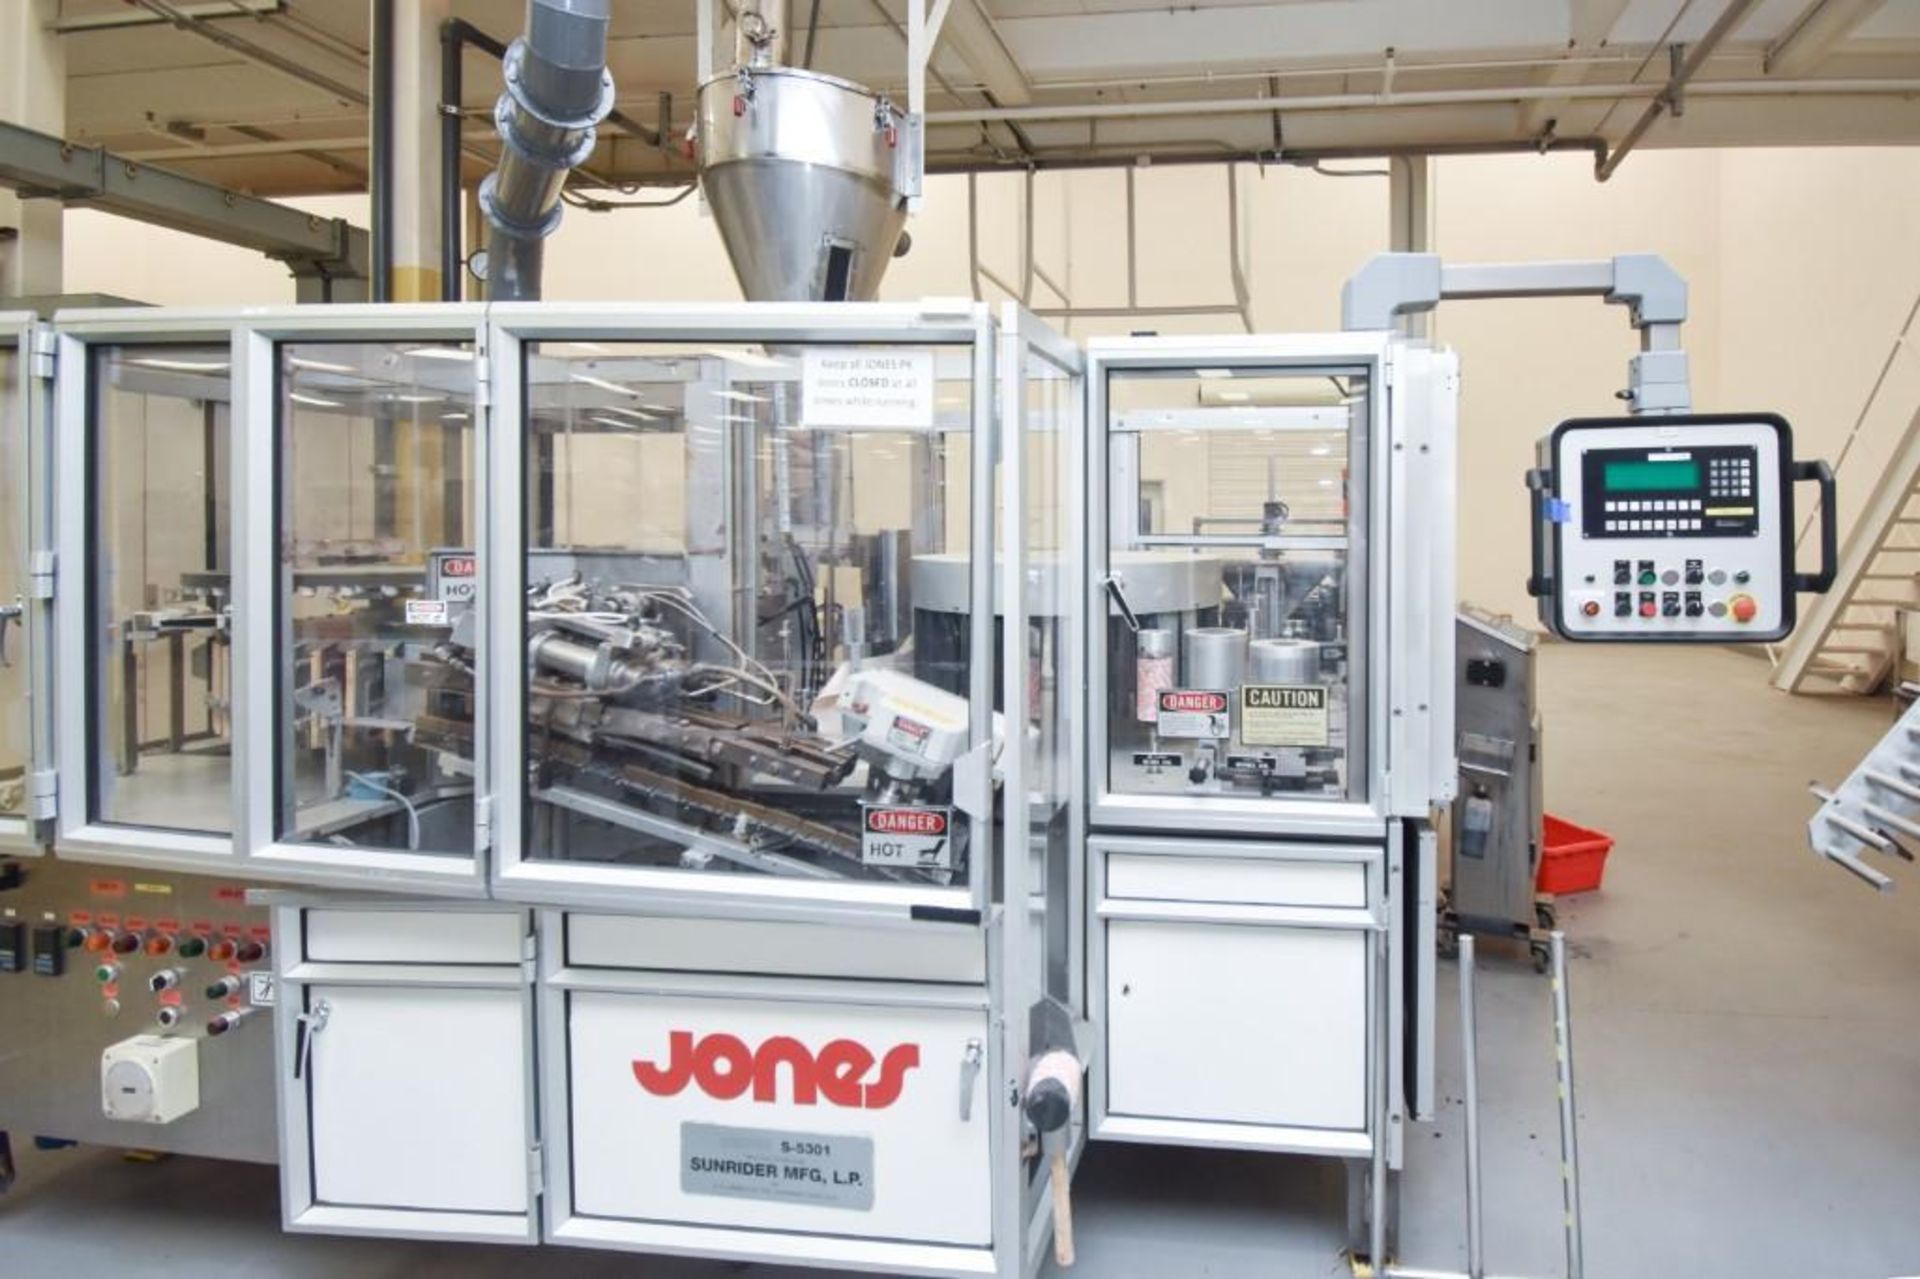 R. A. Jones PK-4000 Pouch / Sachet Filling Machine with CTC Splicer and Knife Cutoff Station - Image 3 of 12